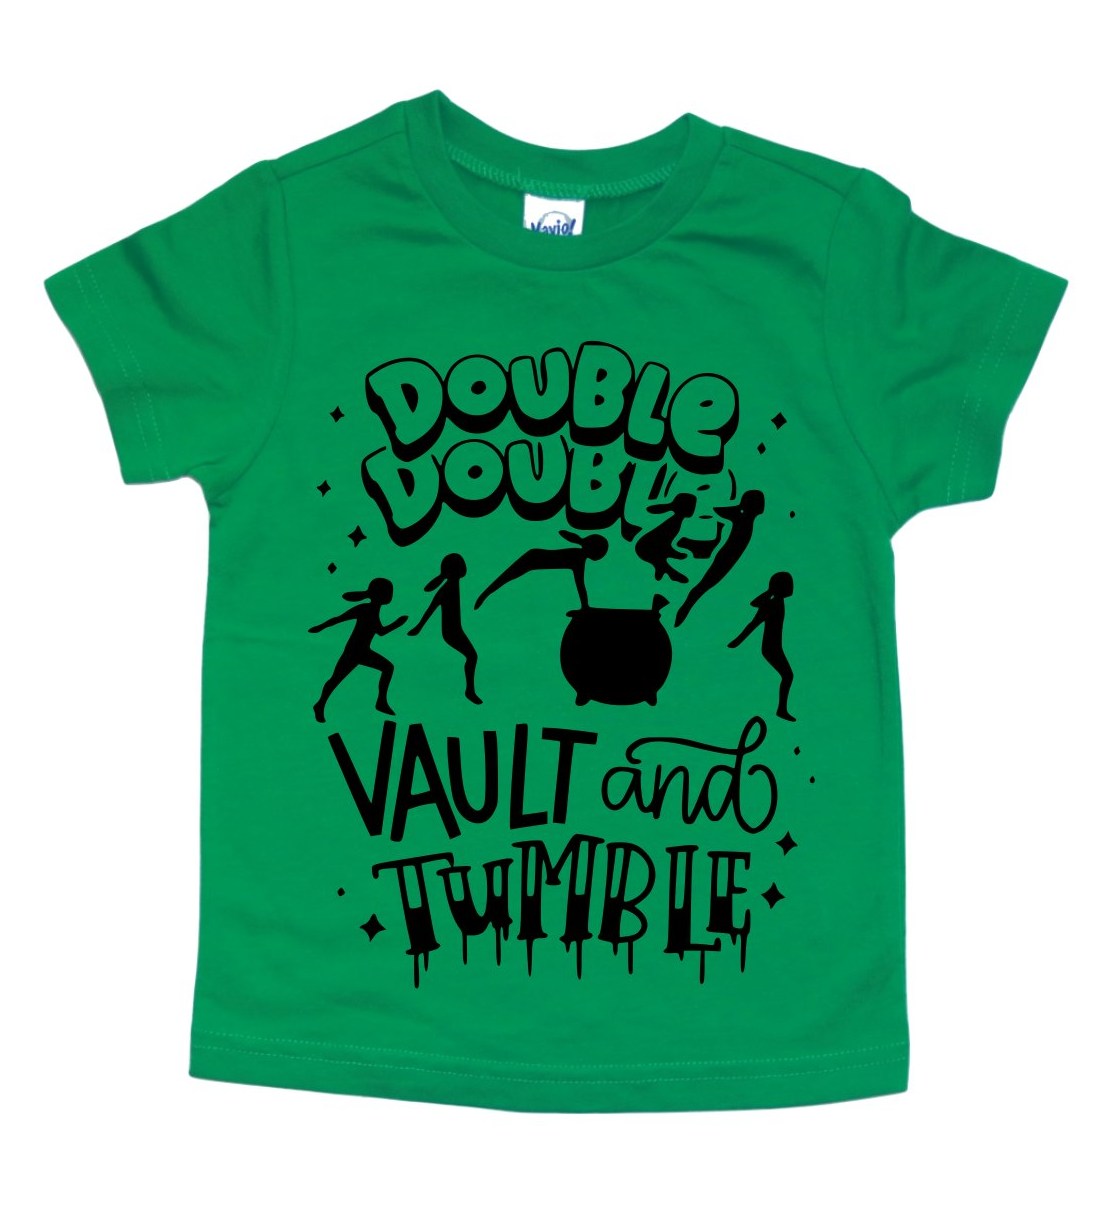 DOUBLE DOUBLE VAULT AND TUMBLE KIDS SHIRT